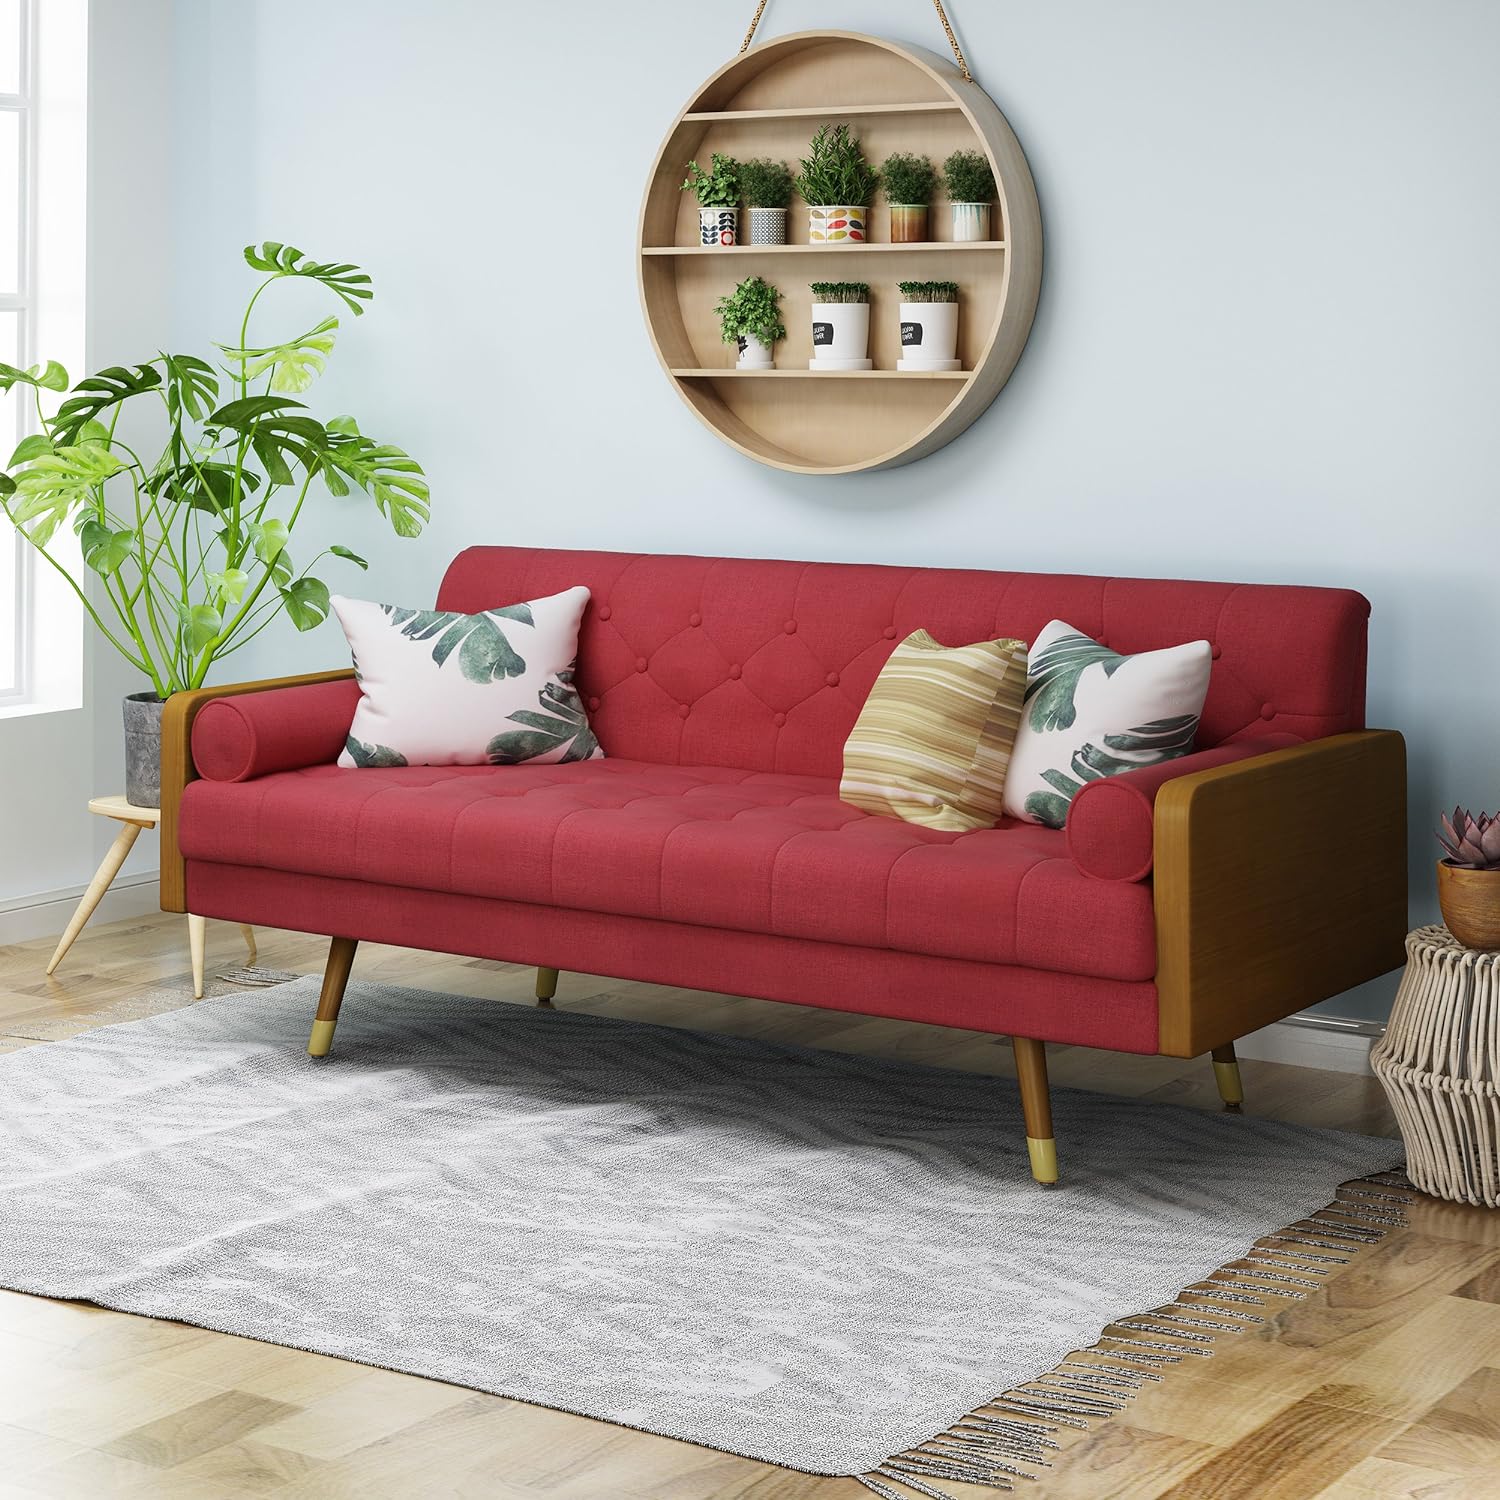 Mid-Century Style Sofa in Red Hue